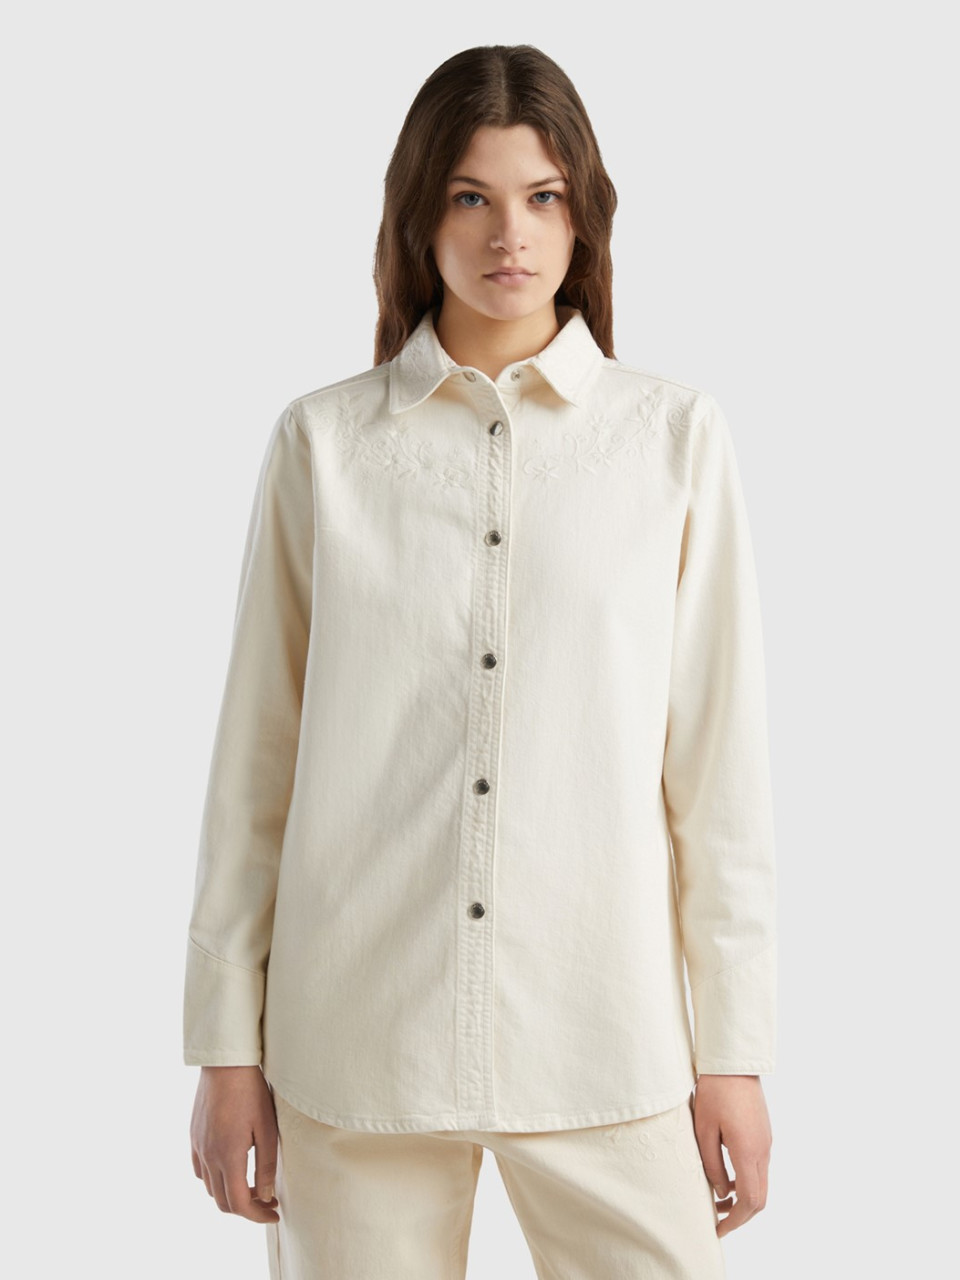 Benetton, Oversized Shirt With Floral Embroidery, Creamy White, Women